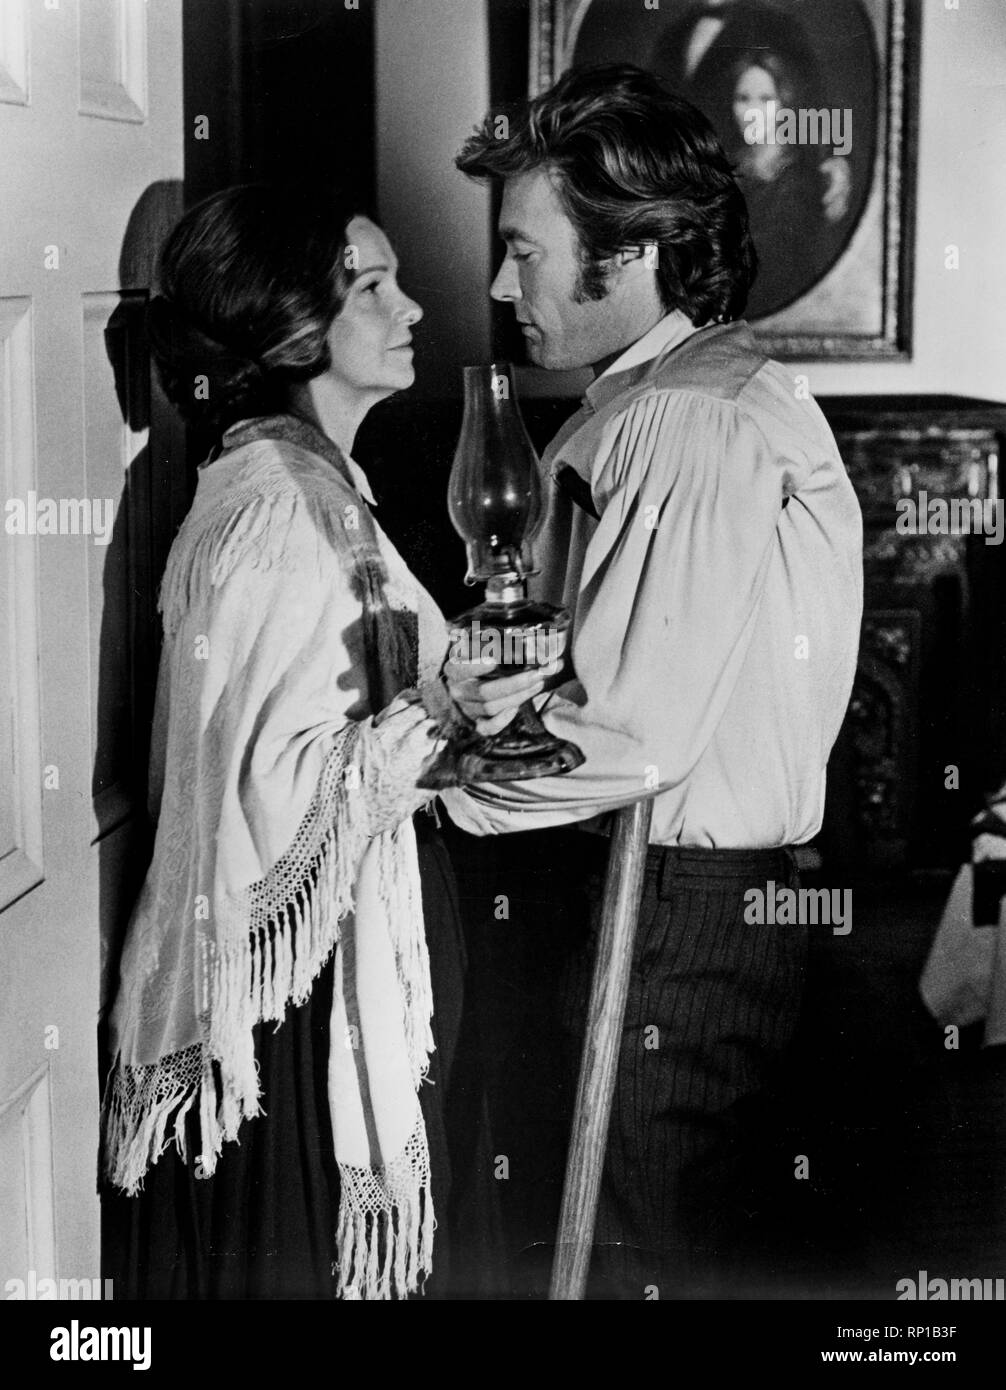 geraldine page, clint eastwood, the beguiled, 1971 Stock Photo